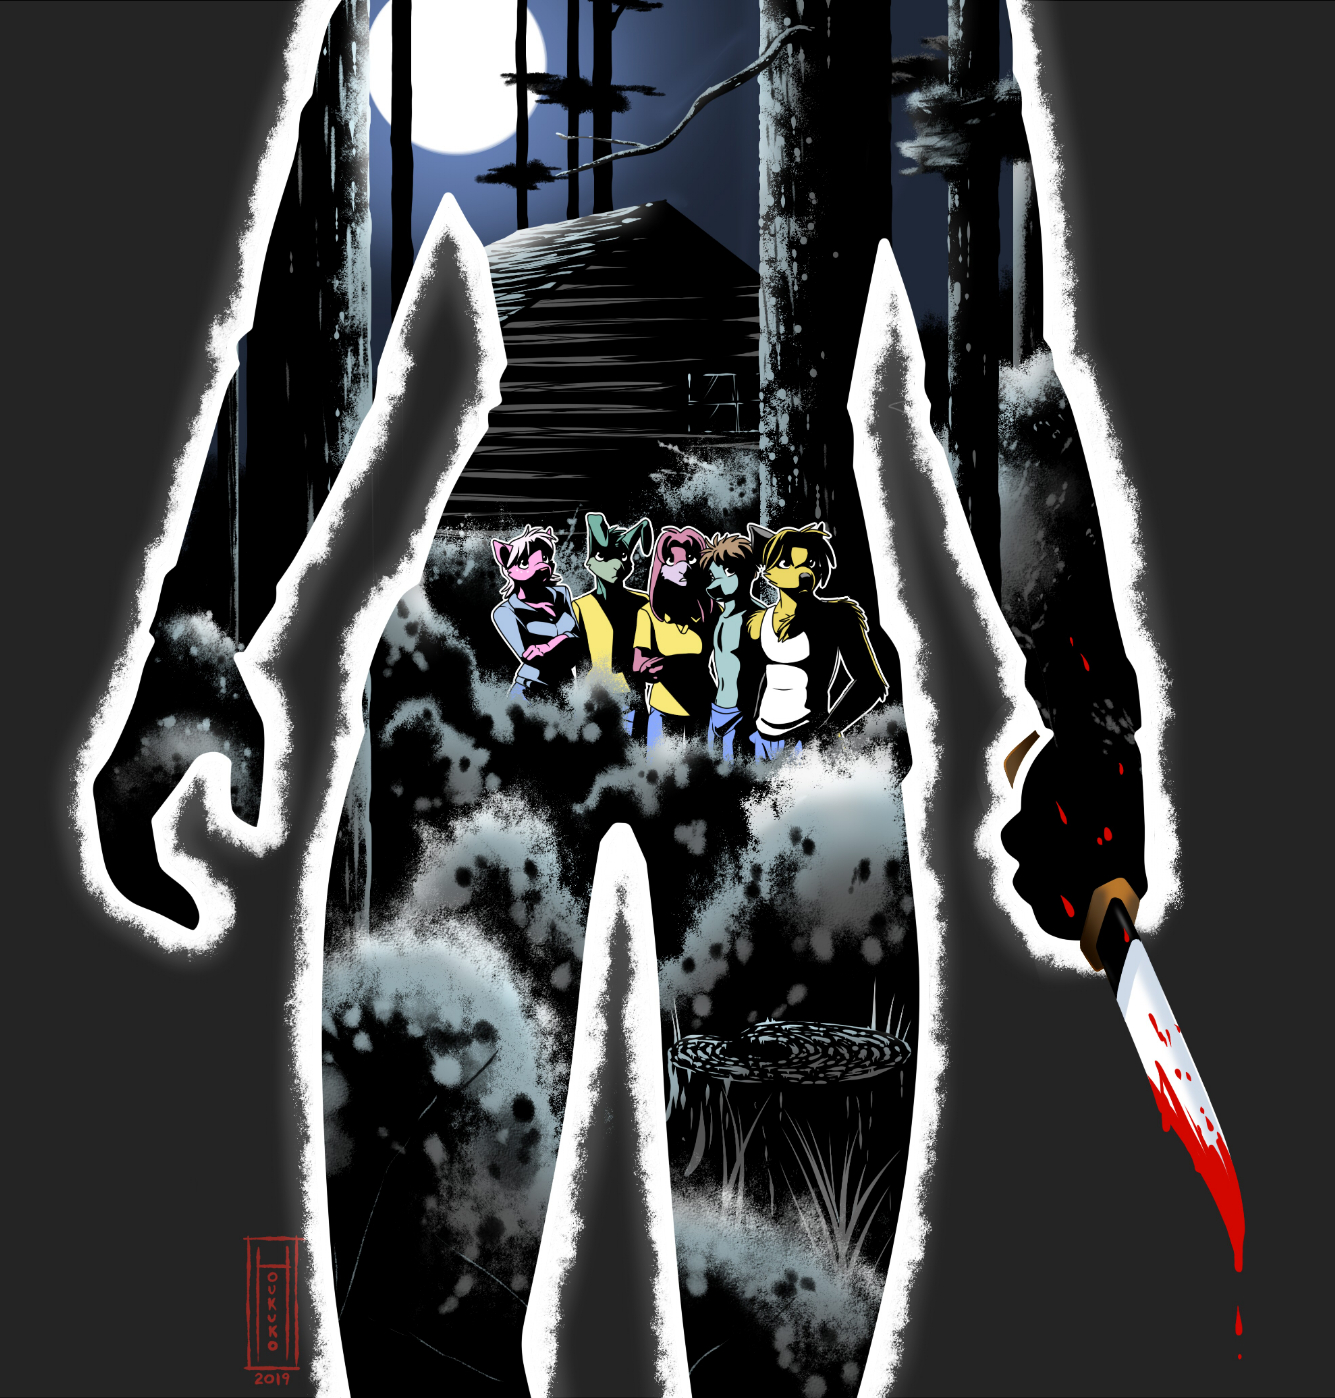 Anthro Friday the 13th cover